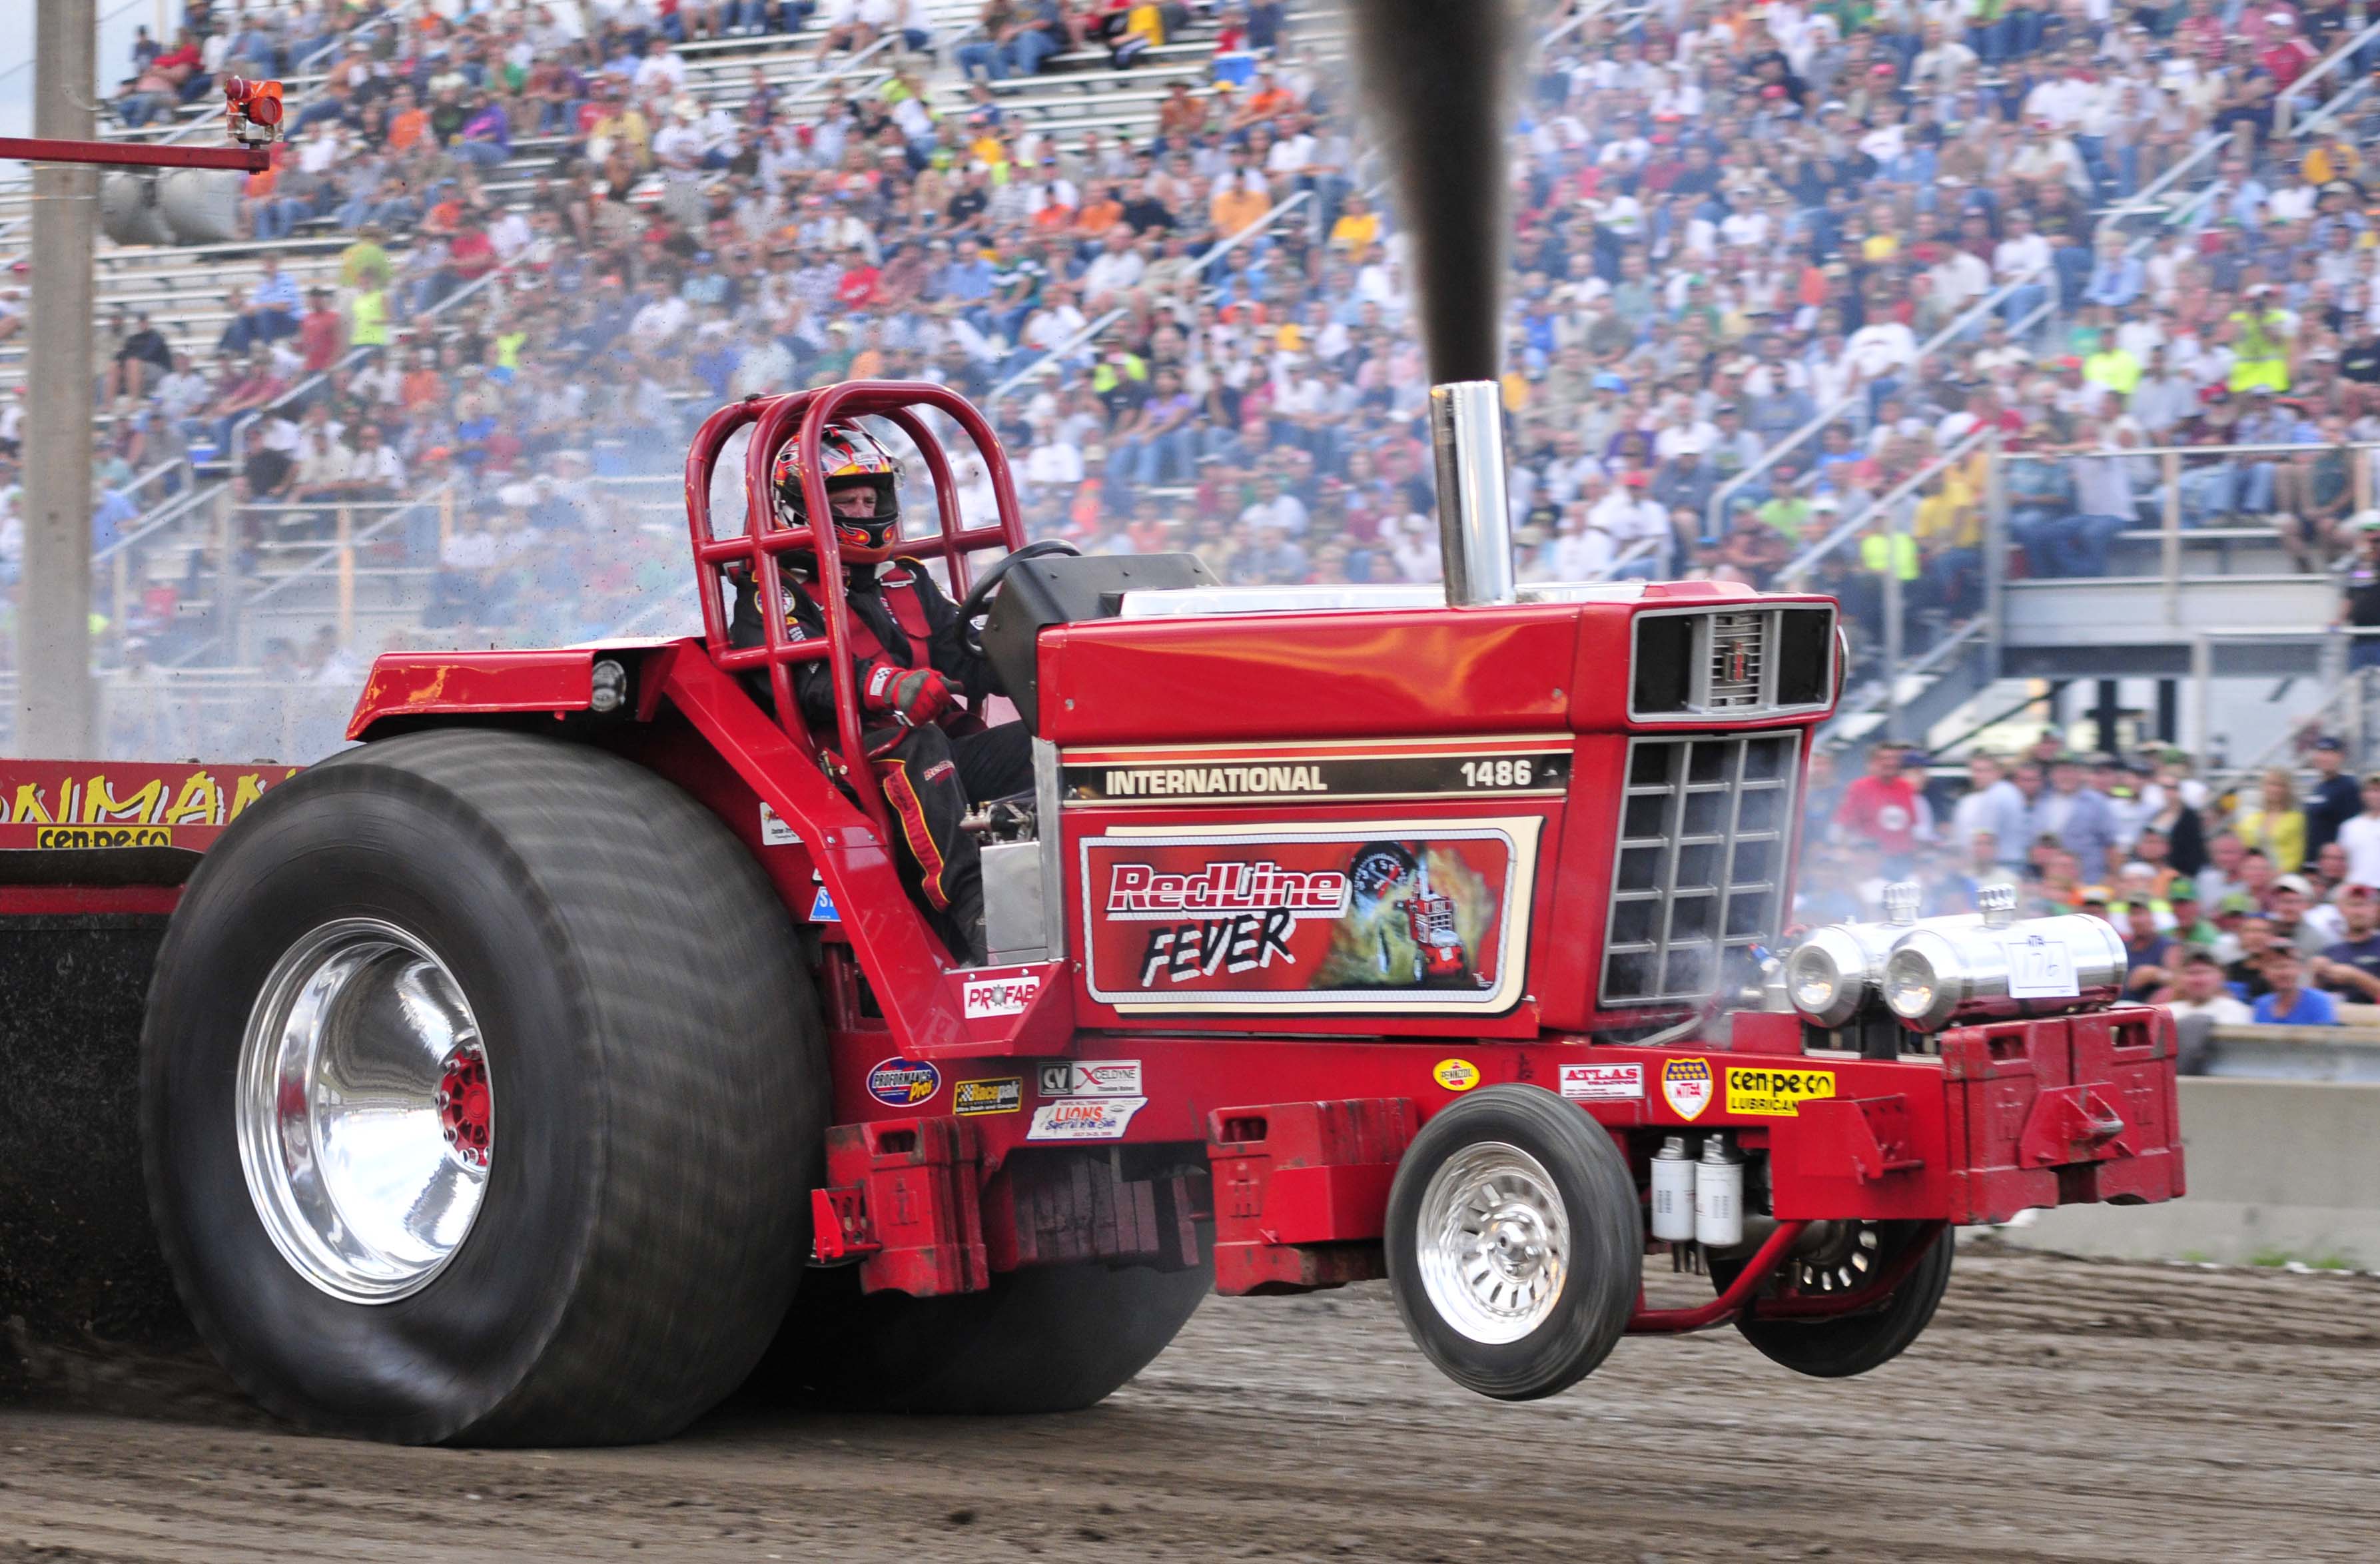 tractor pulling, Race, Racing, Hot, Rod, Rods, Tractor, International Wallpaper